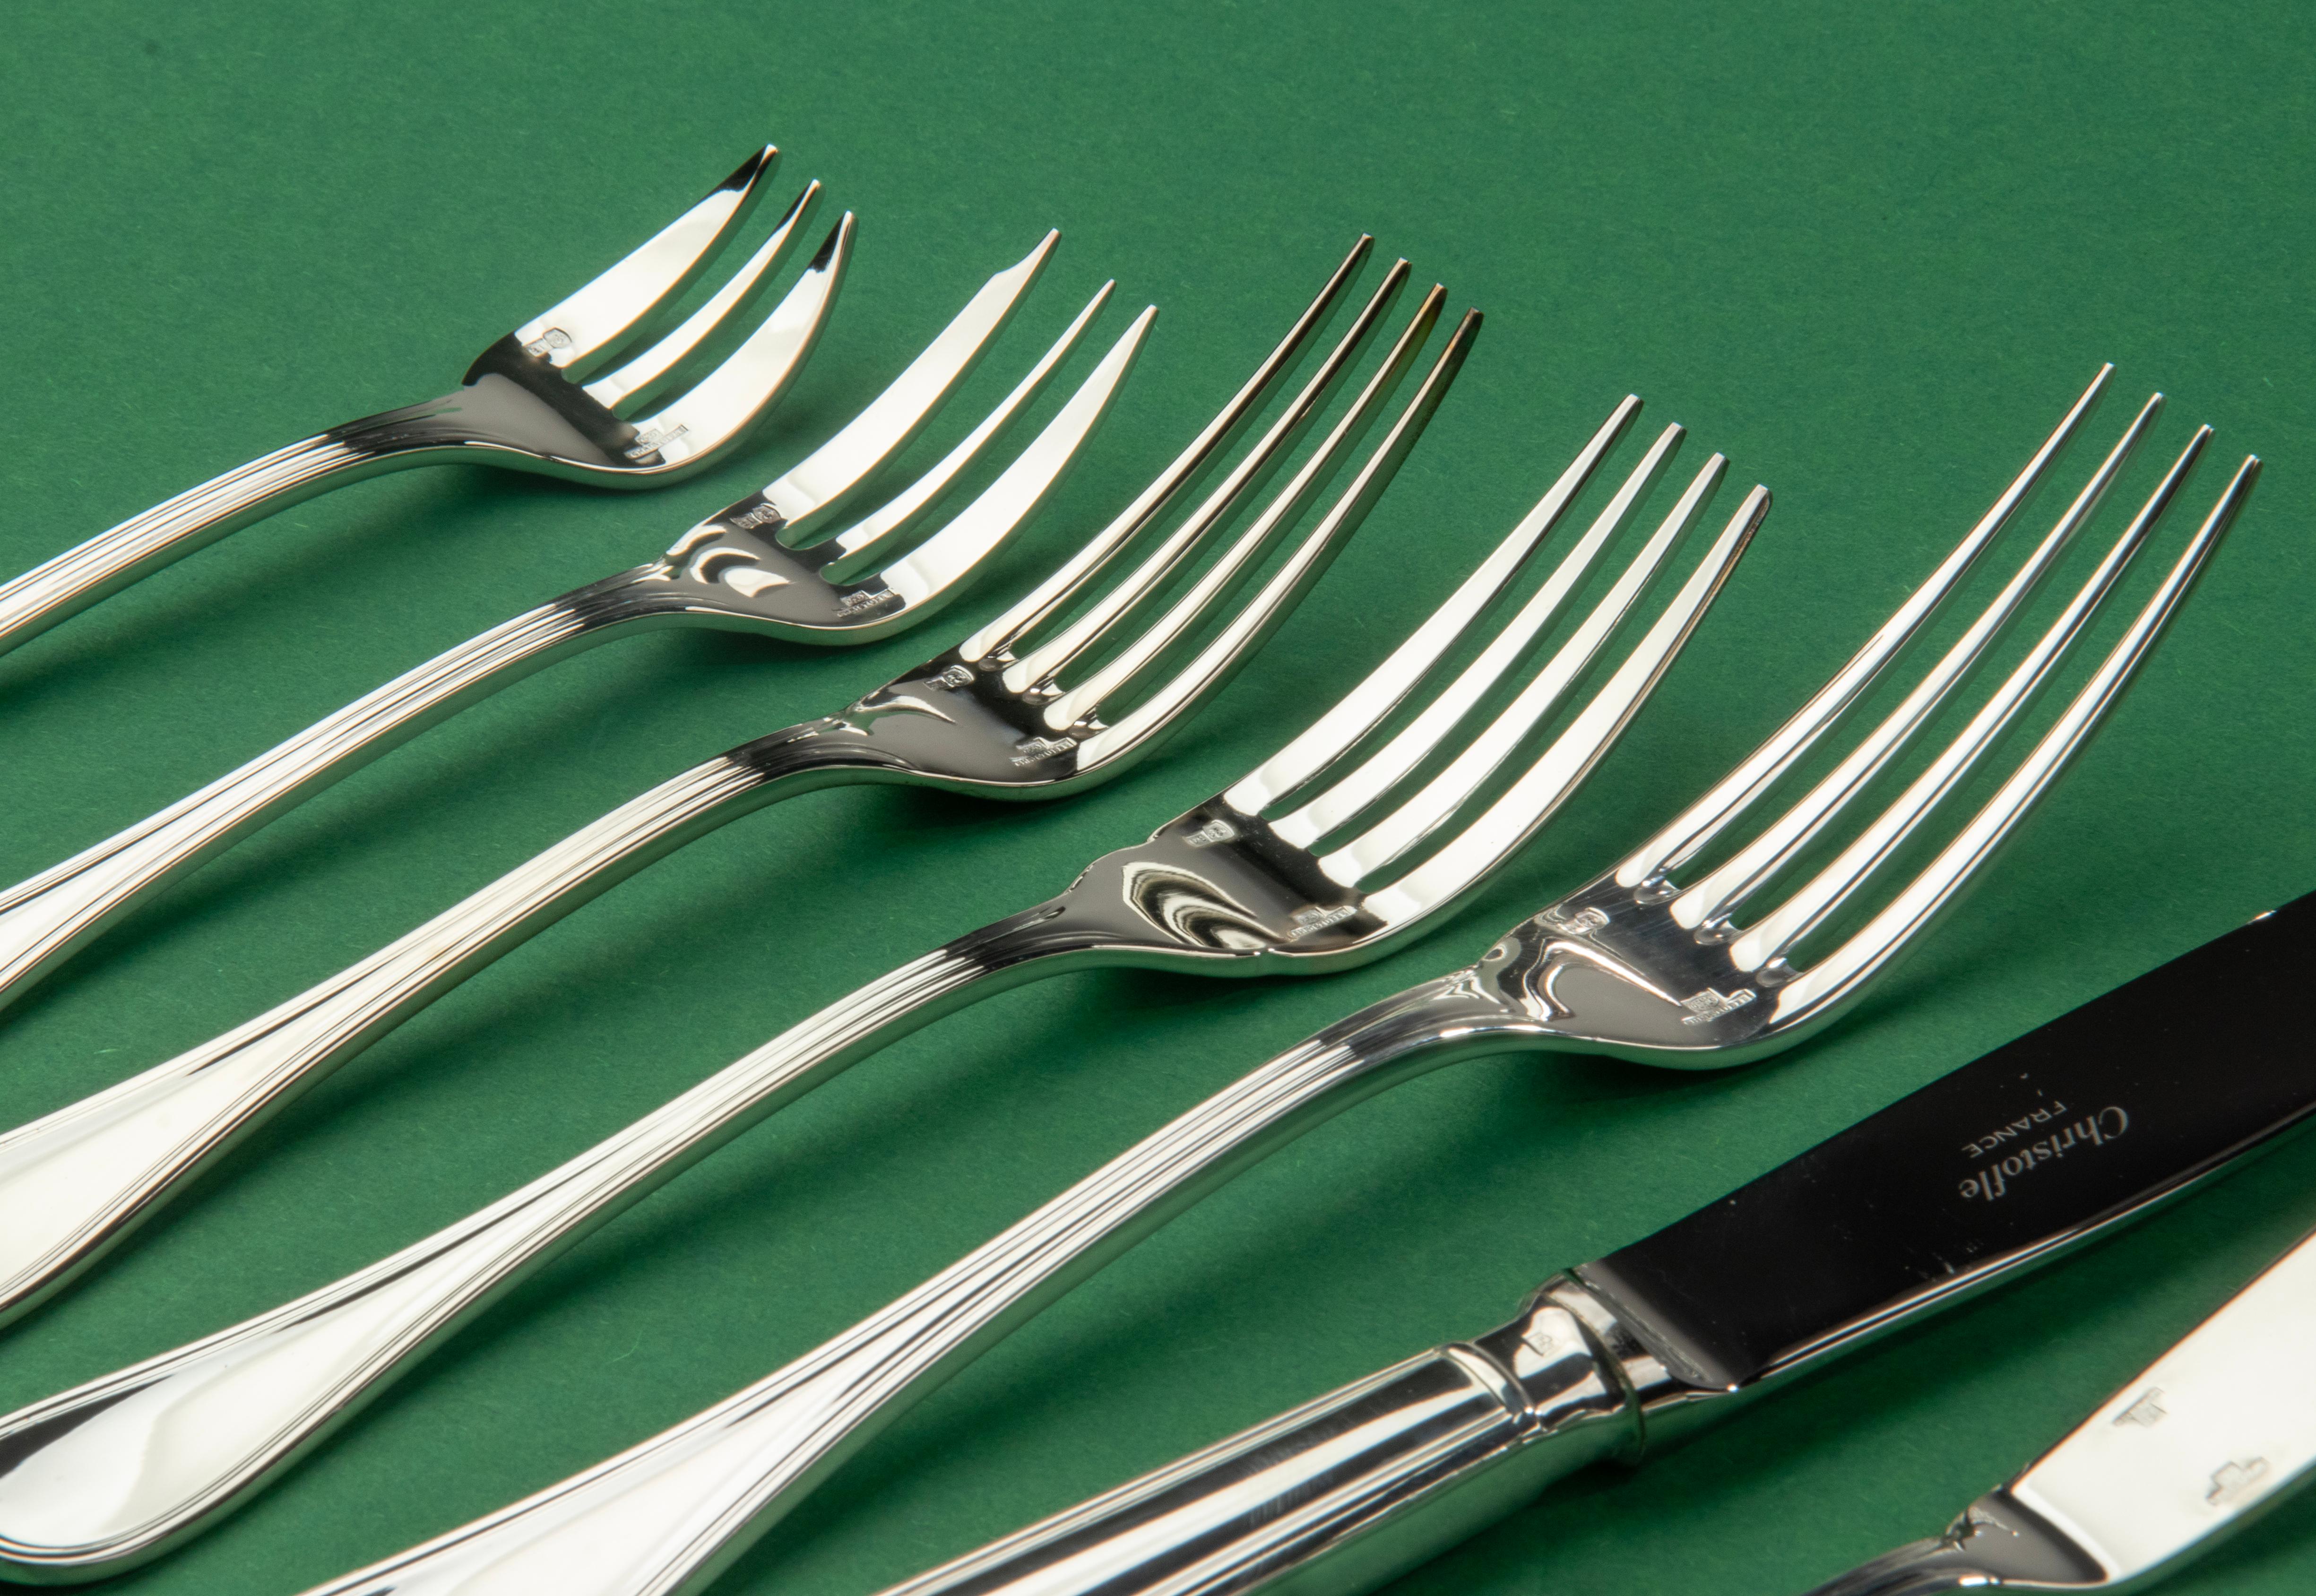 142-Piece Set Silver Plated Flatware for 12 Persons - Christofle - model Albi 5